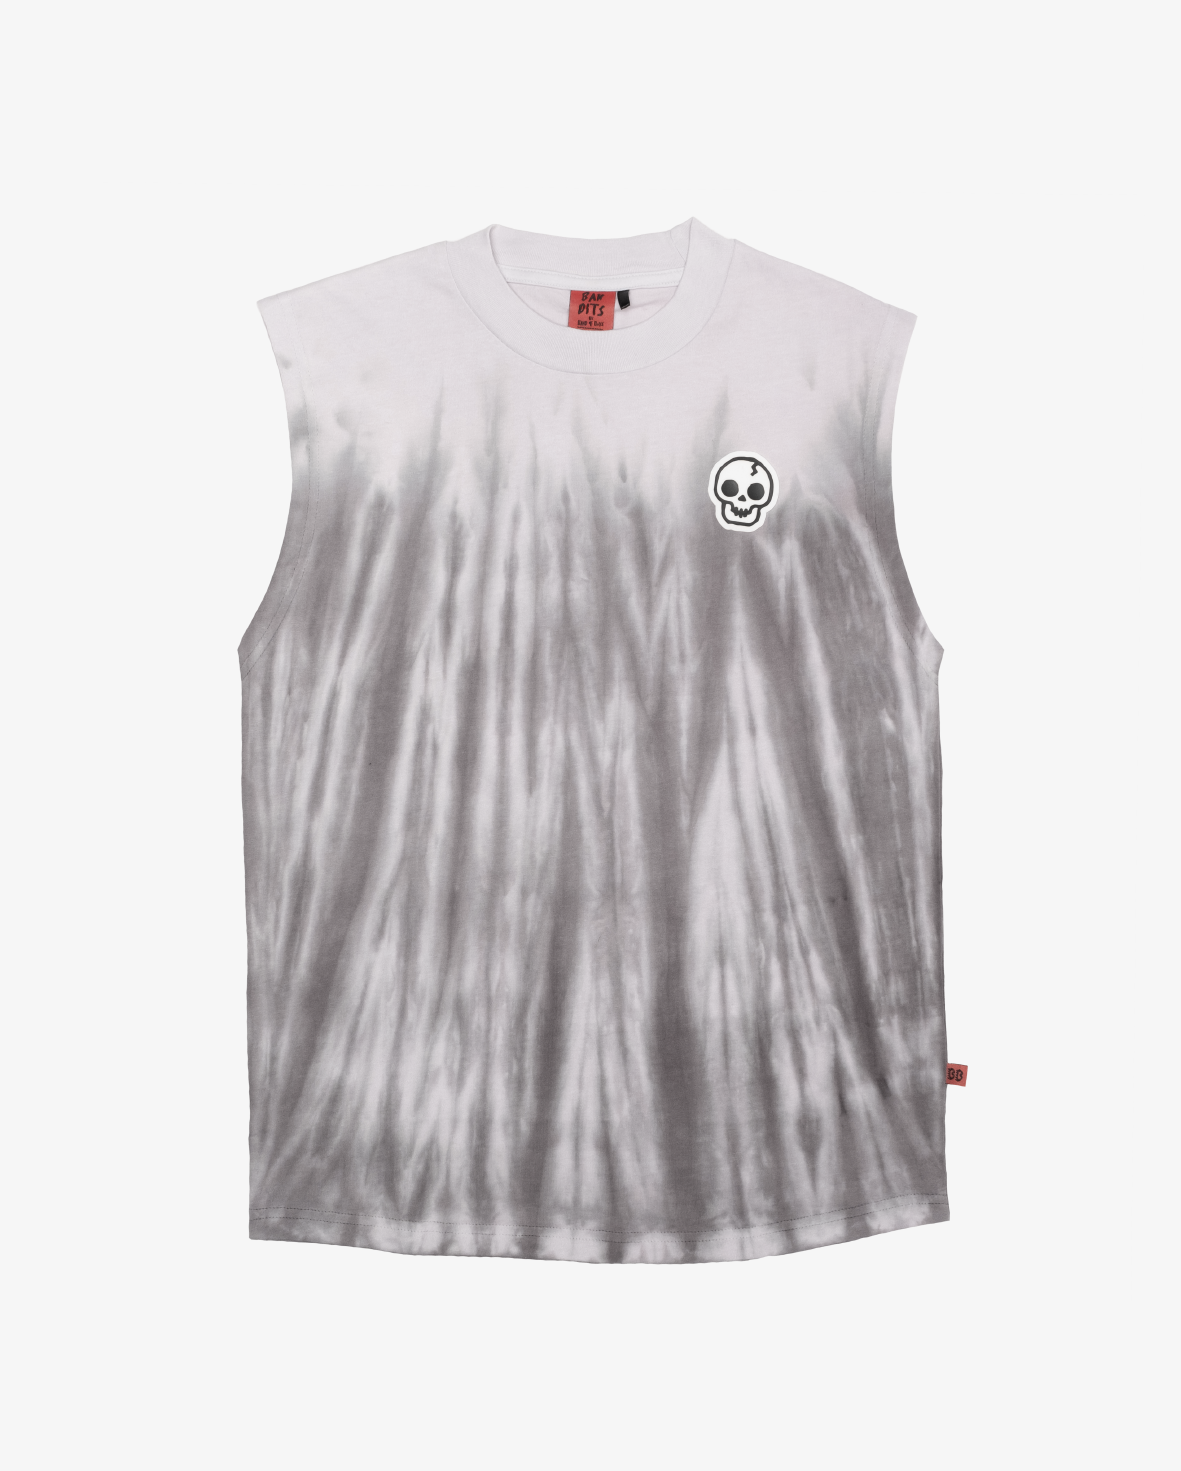 Band of Boys - Tie-Dyed Skull Muscle Tank